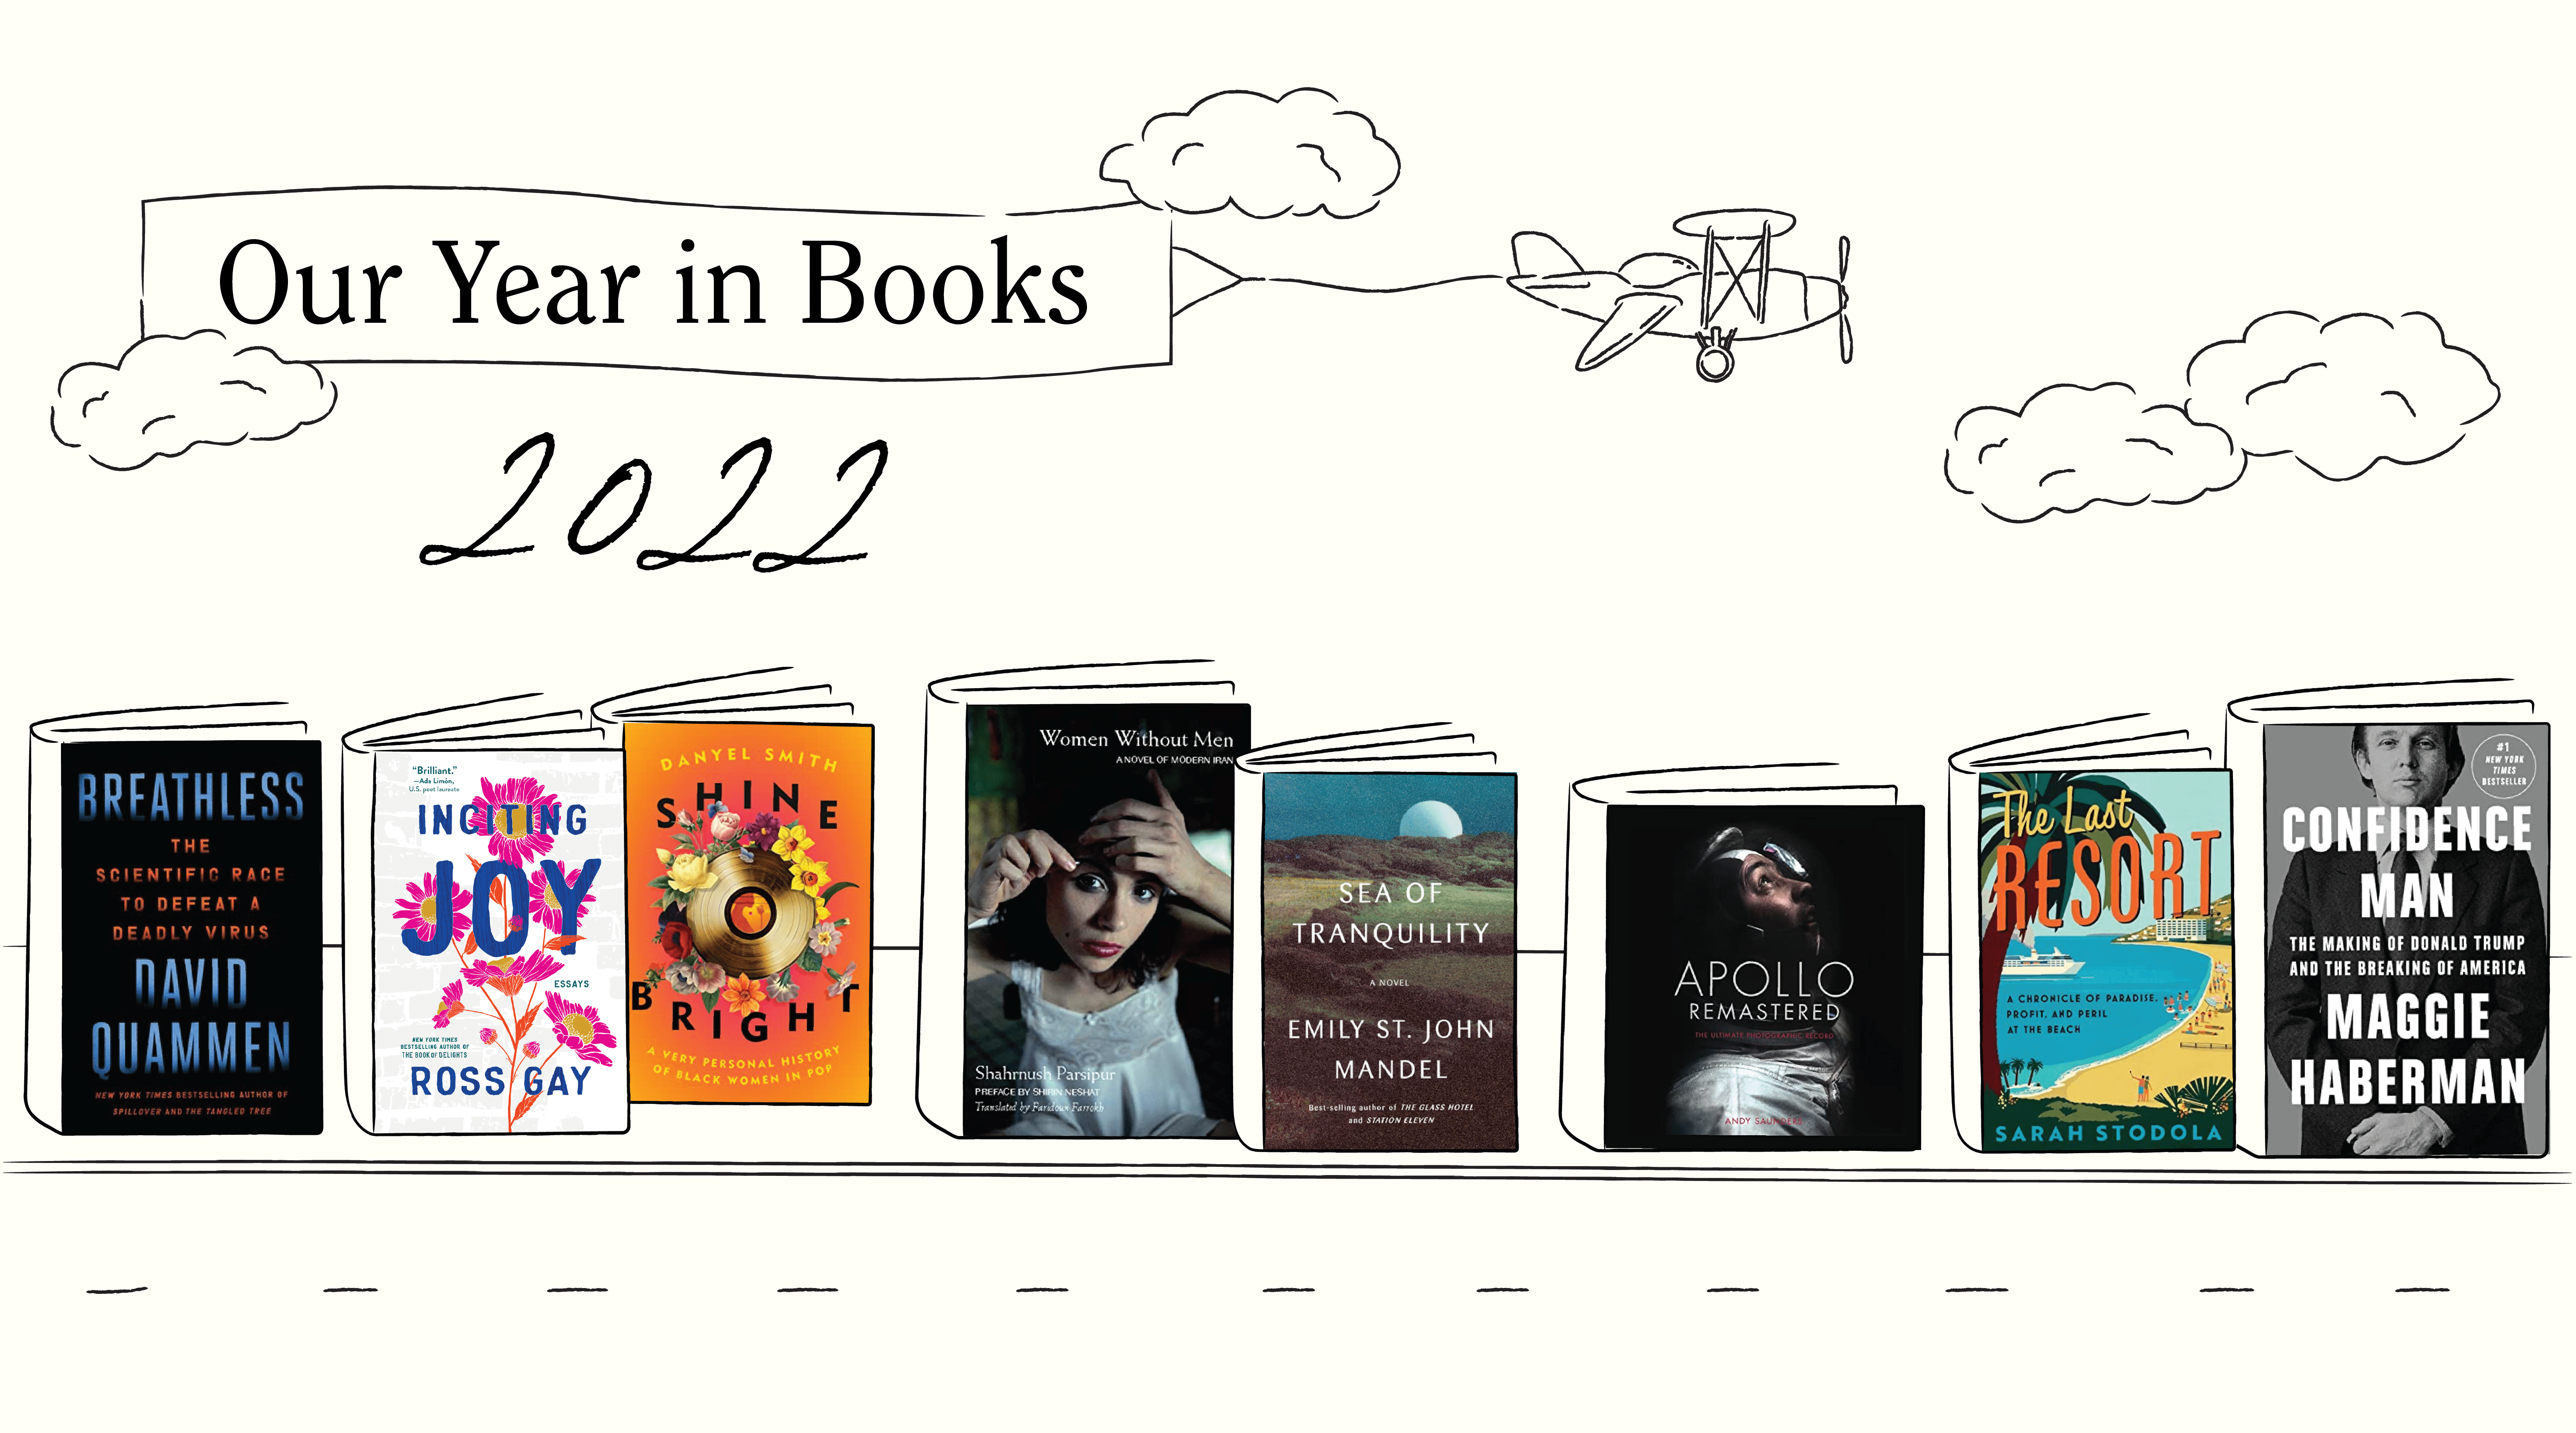 Our Year in Books